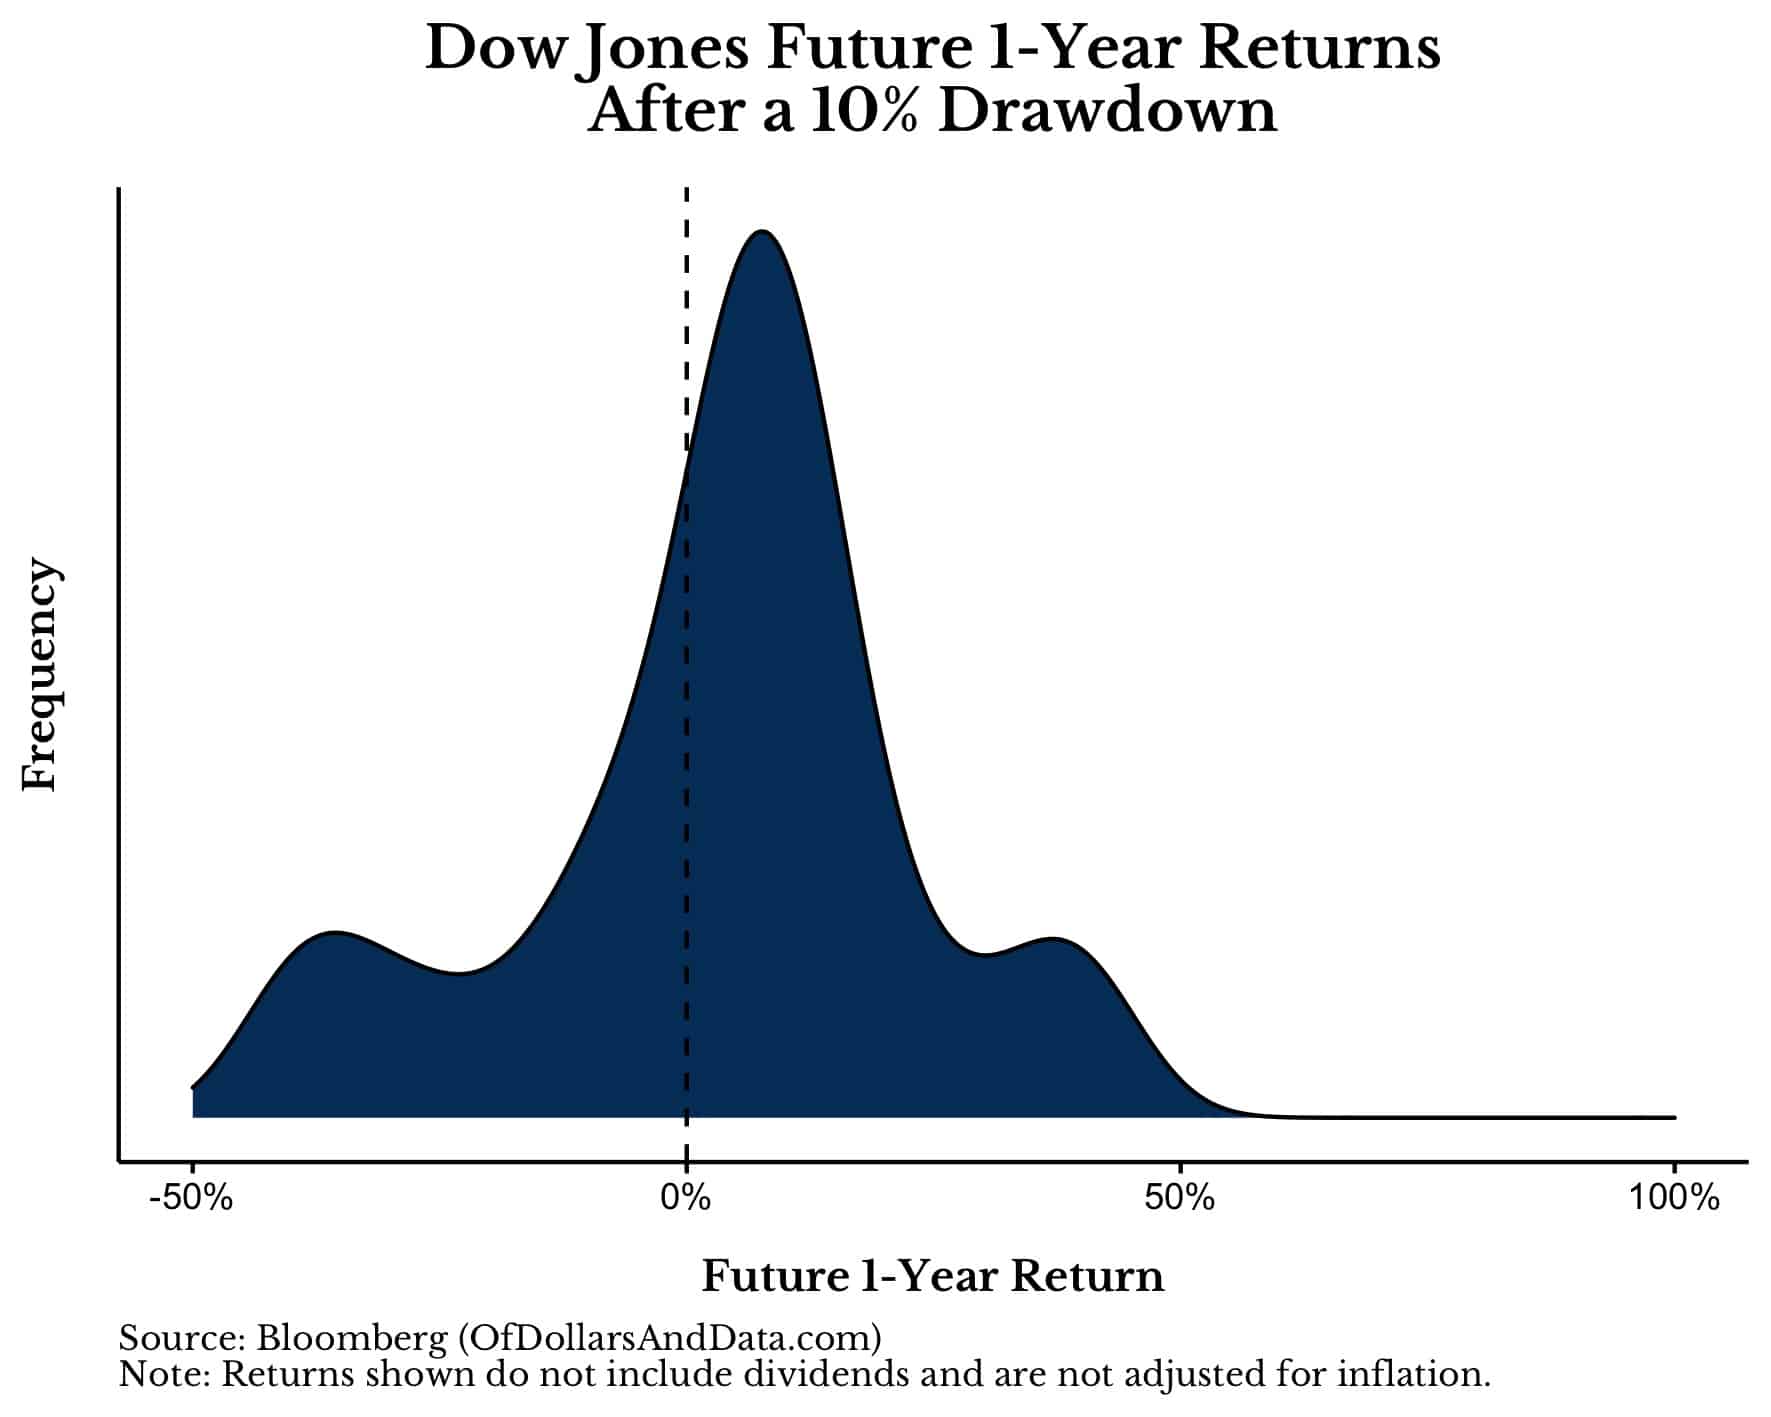 Distribution of Dow Jones Industrial Average 1-year future returns after a 10% drawdown.